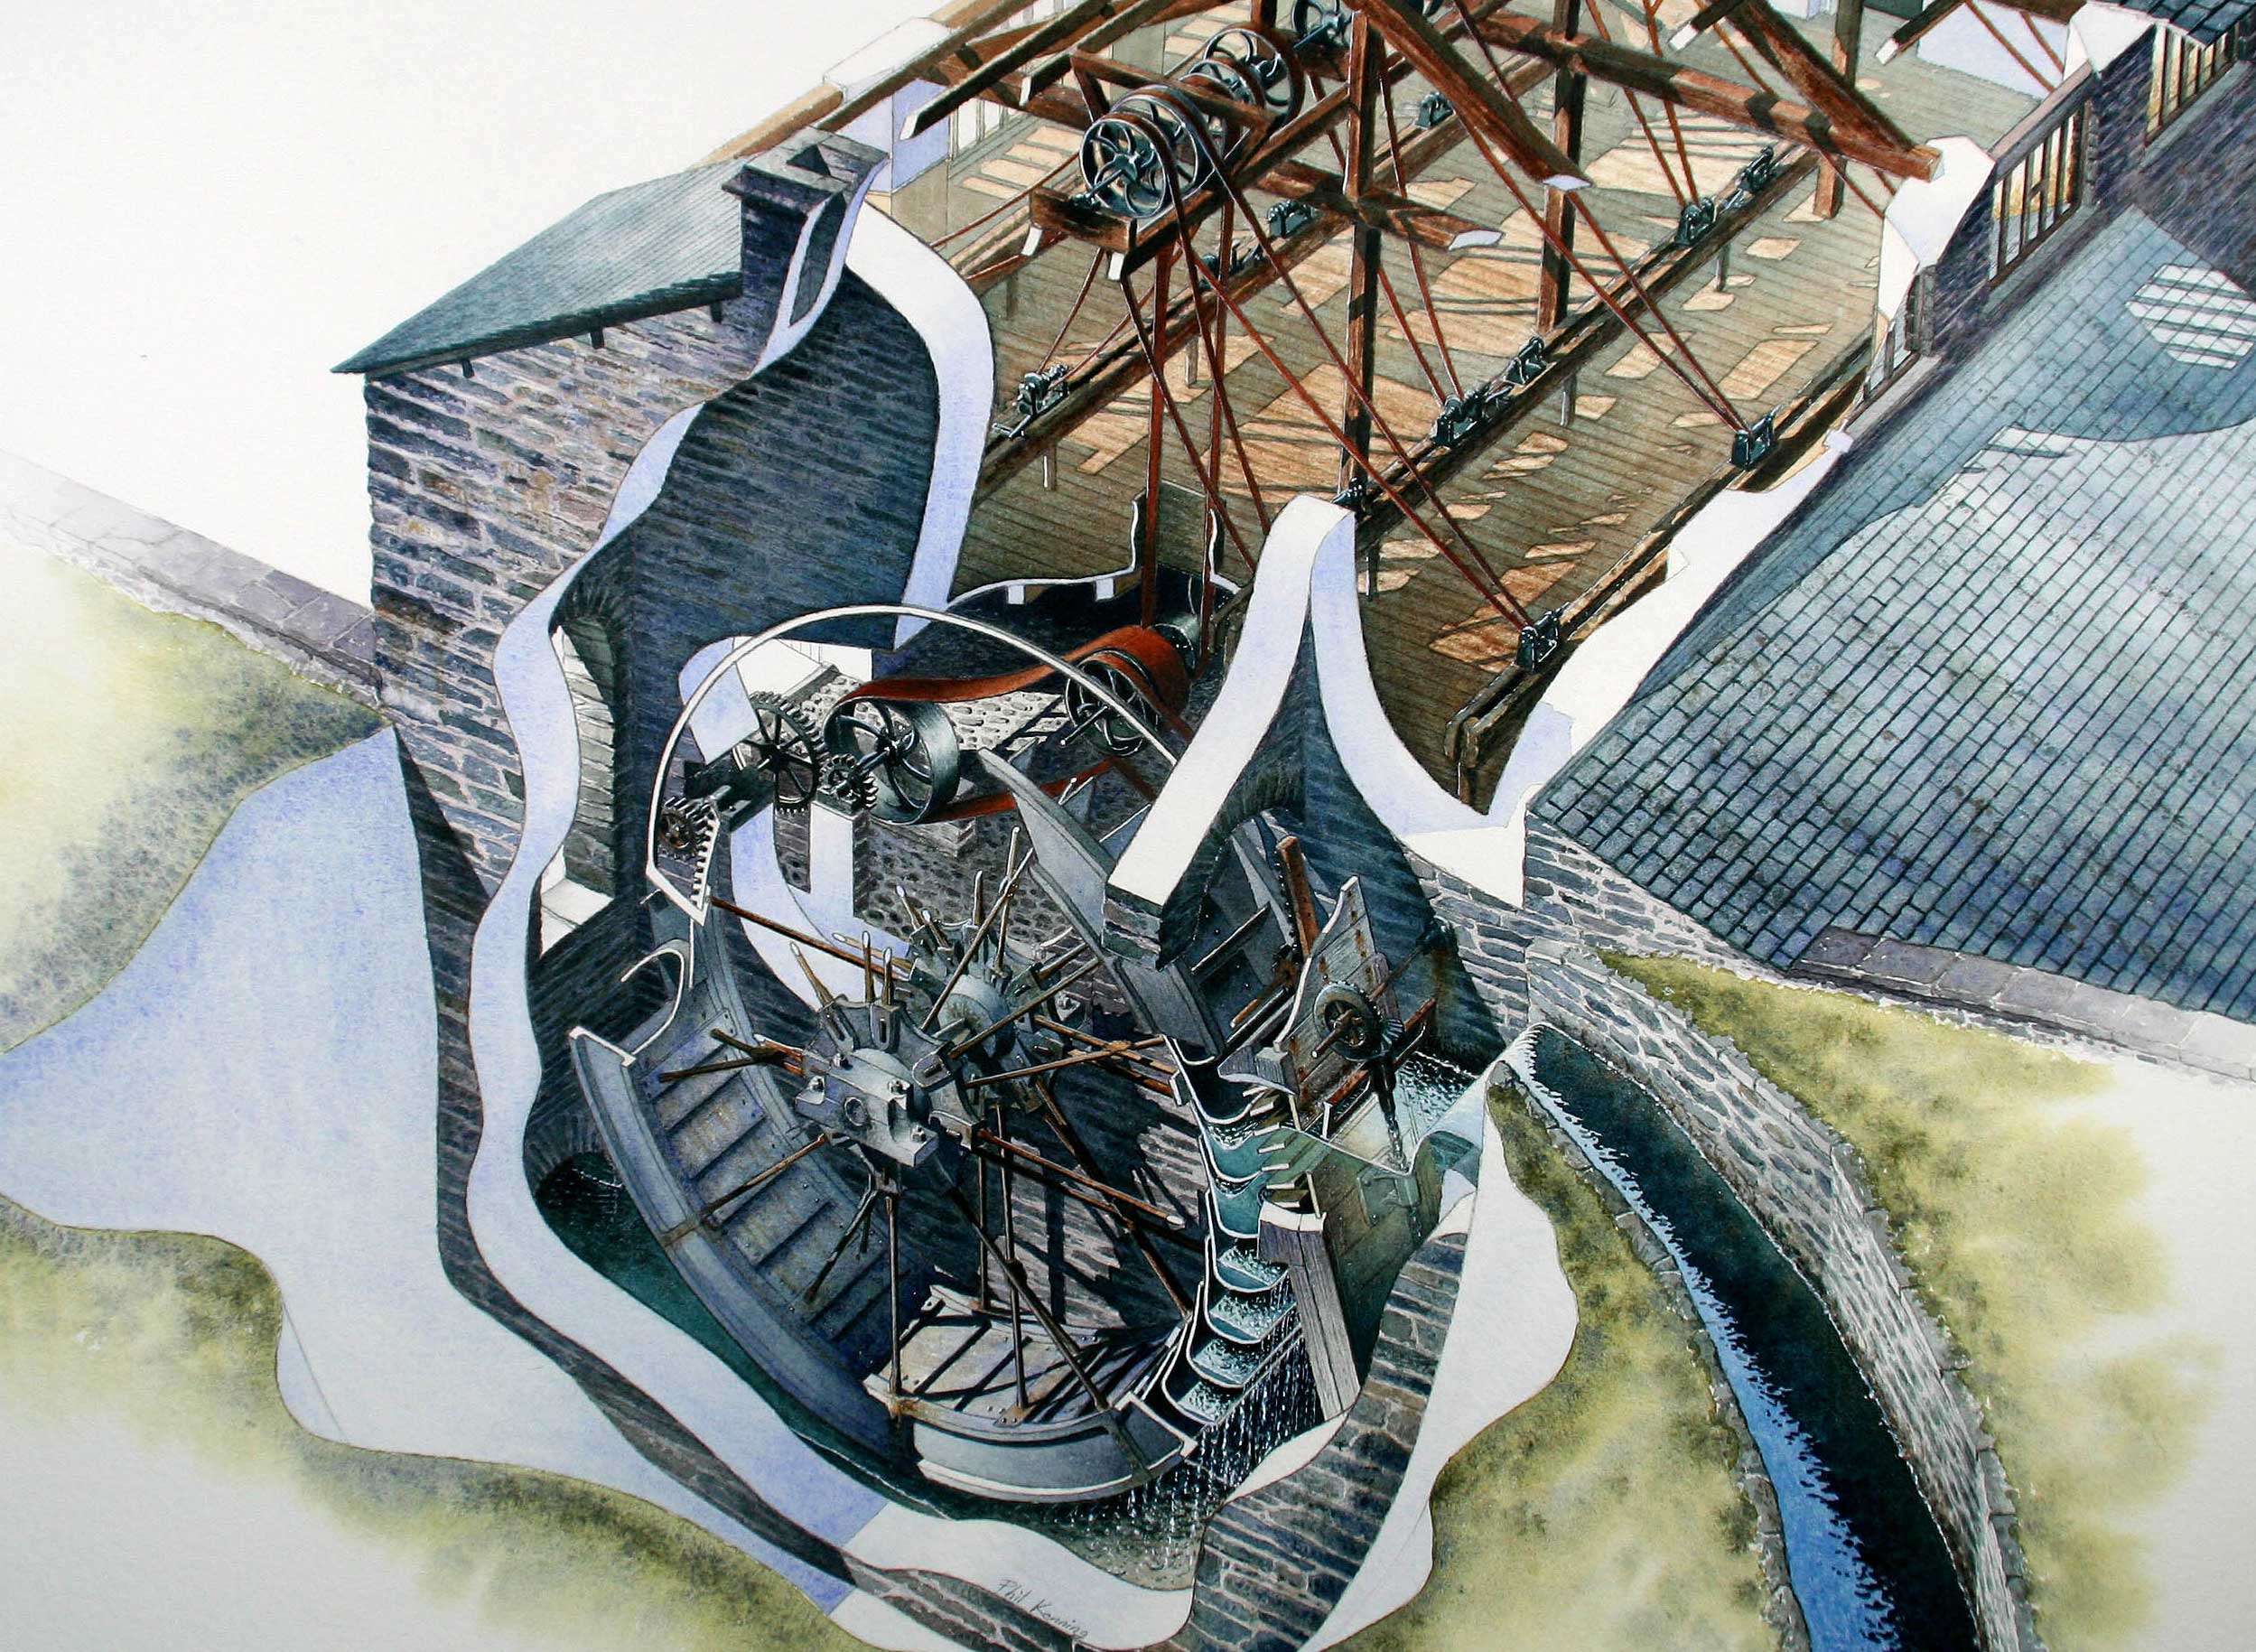 A cutaway reconstruction drawing of the old mill, showing the waterwheel that powered the mill until 1858